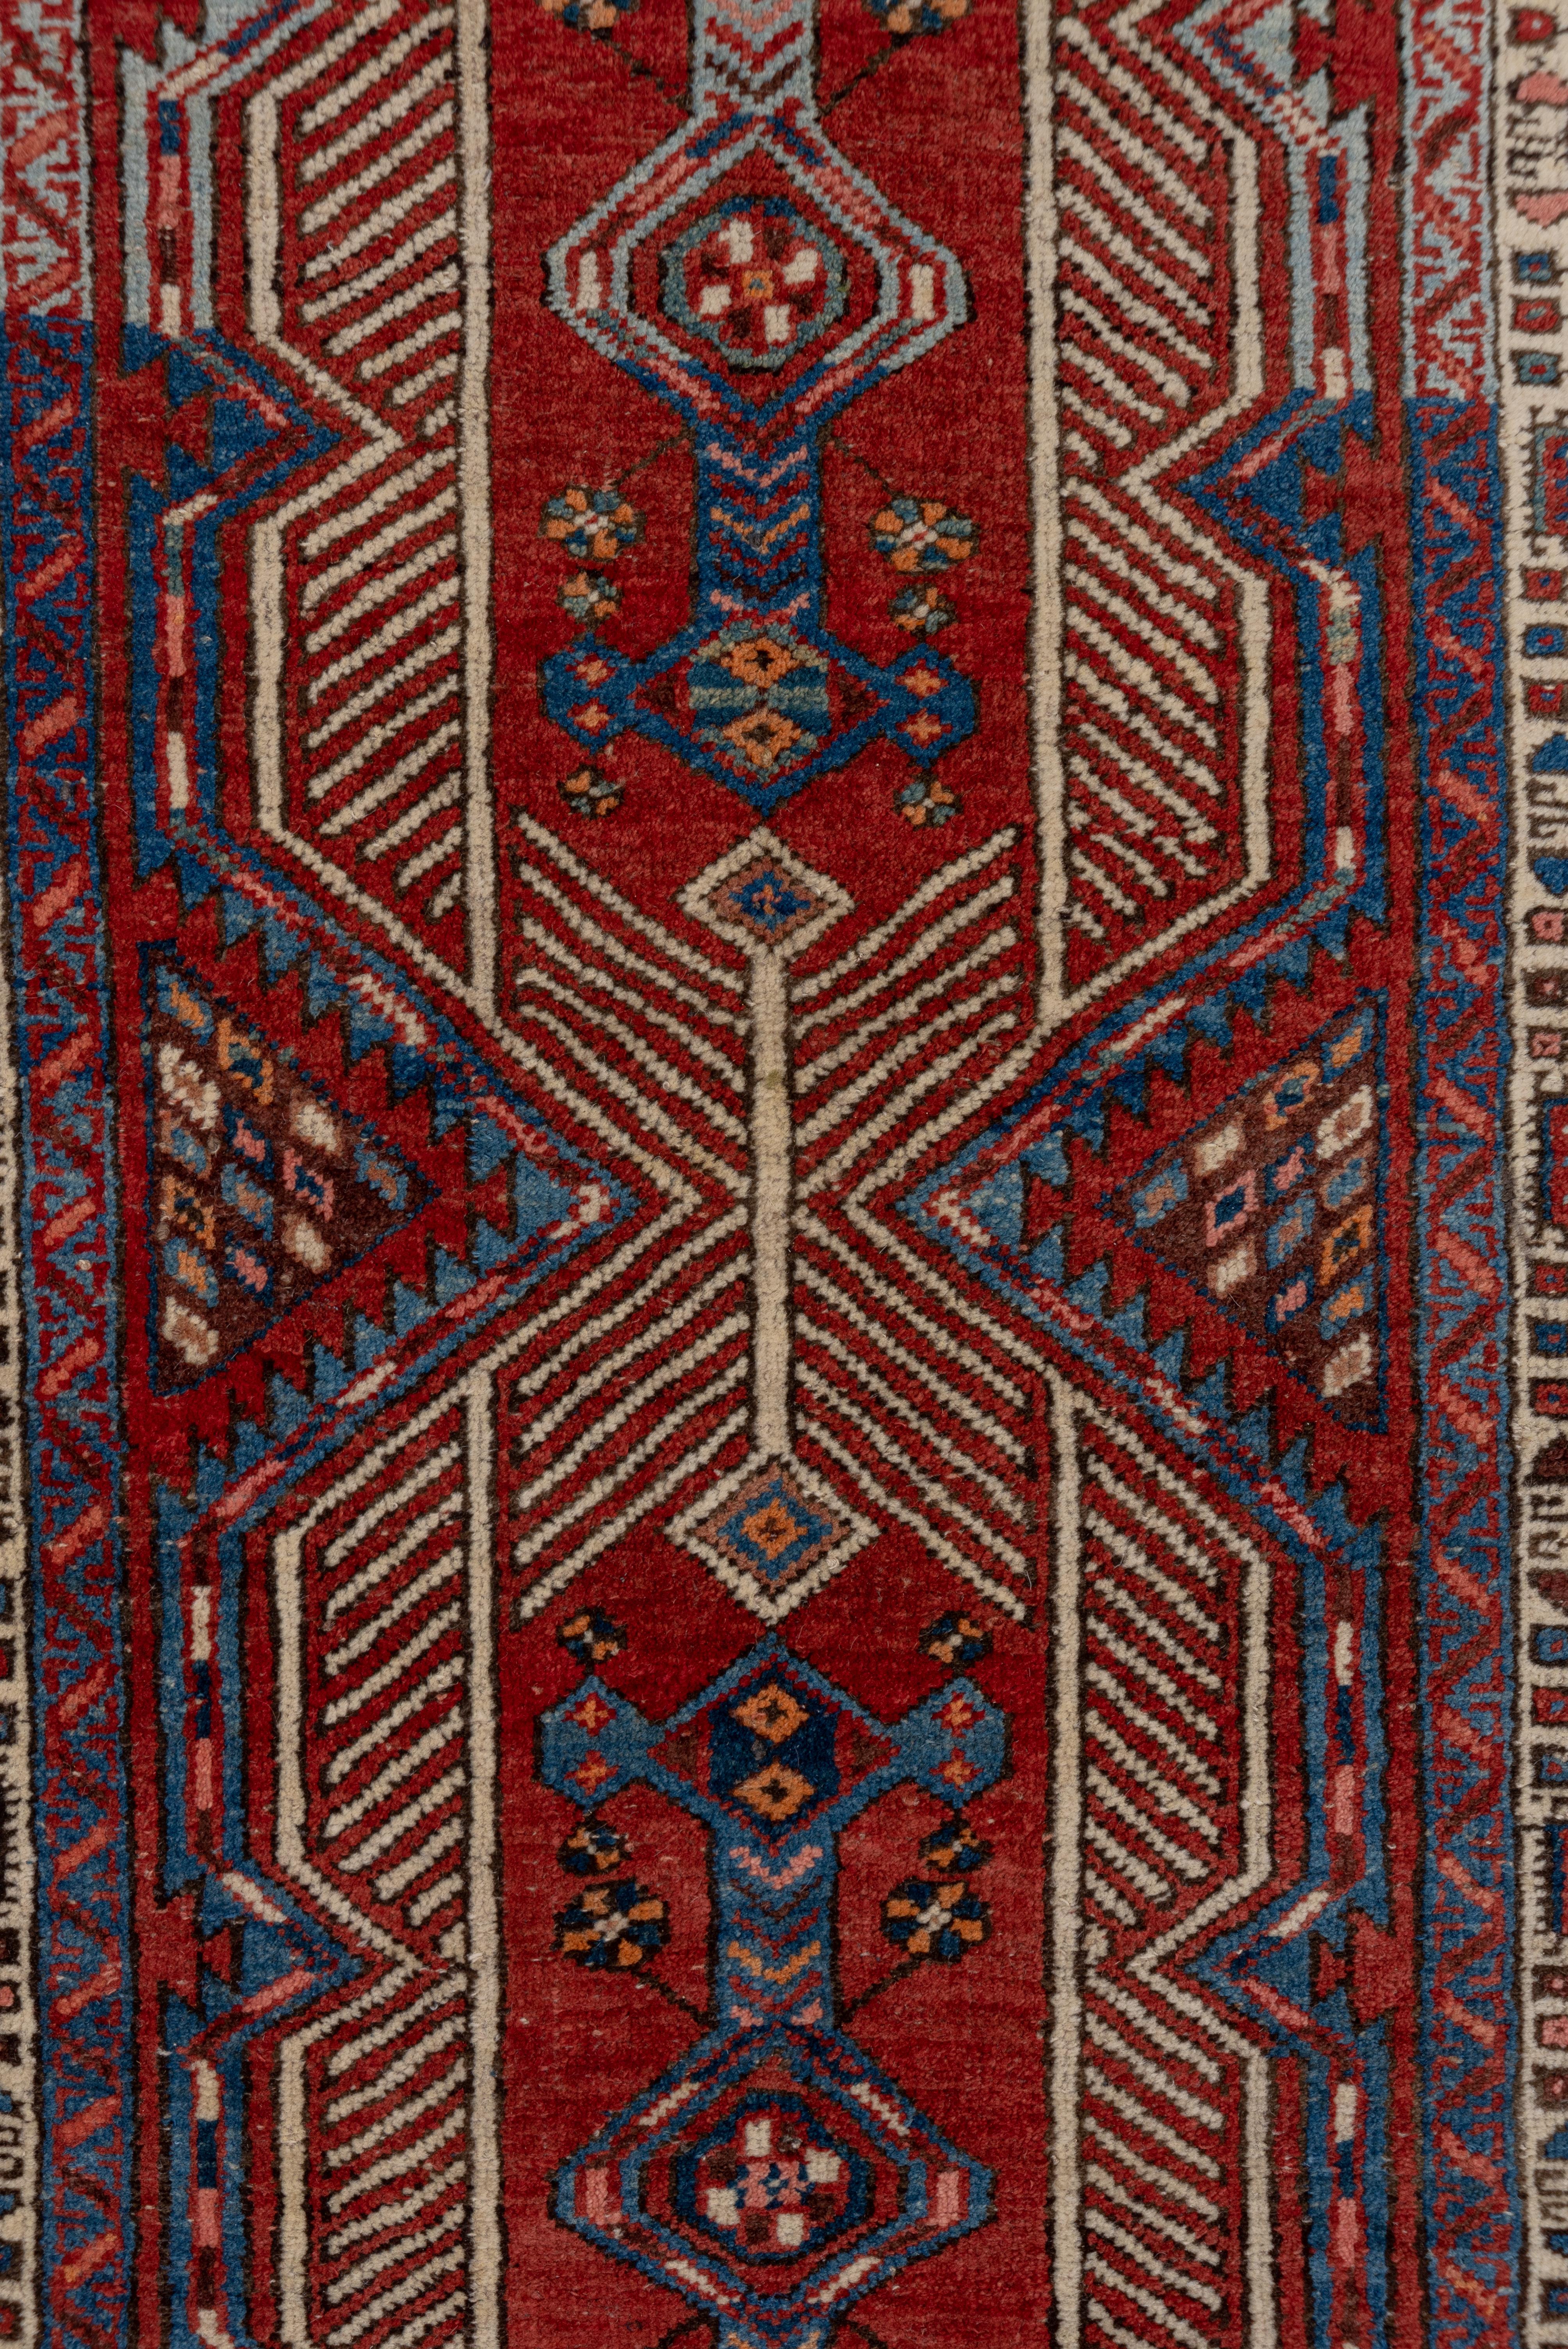 This unusual red ground NW Persian Sarab runner displays two long cartouche motives with ivory fringe internal decoration and floating serrated hexagon sub-medallions with long extenders. Variants of light blue are especially appealing as detail